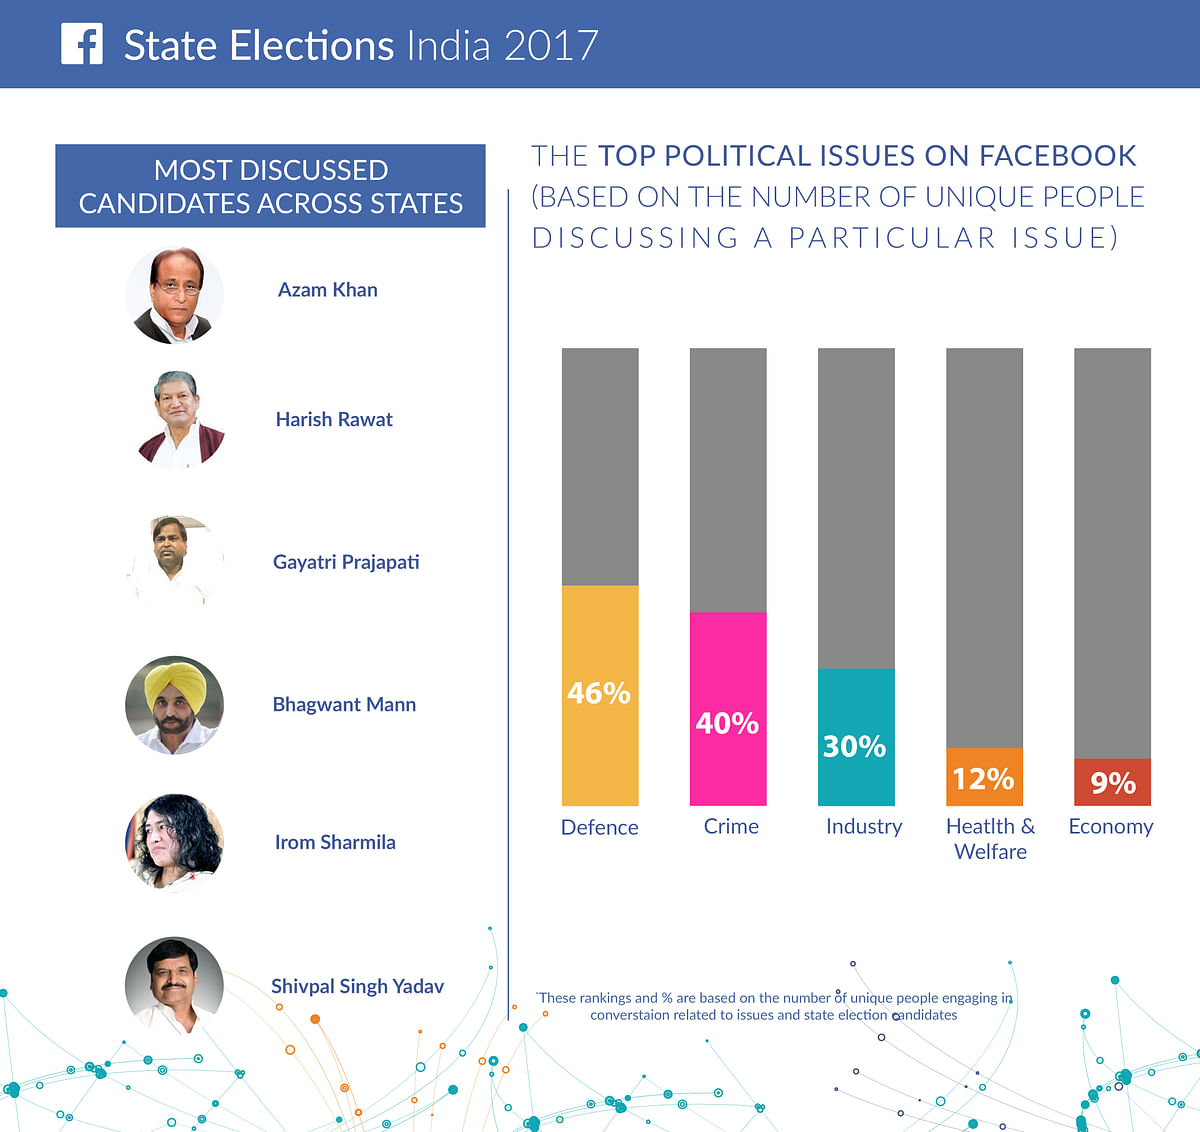 Not surprisingly, PM Modi is the most popular Indian political leader on Facebook, with 40 million likes on his page